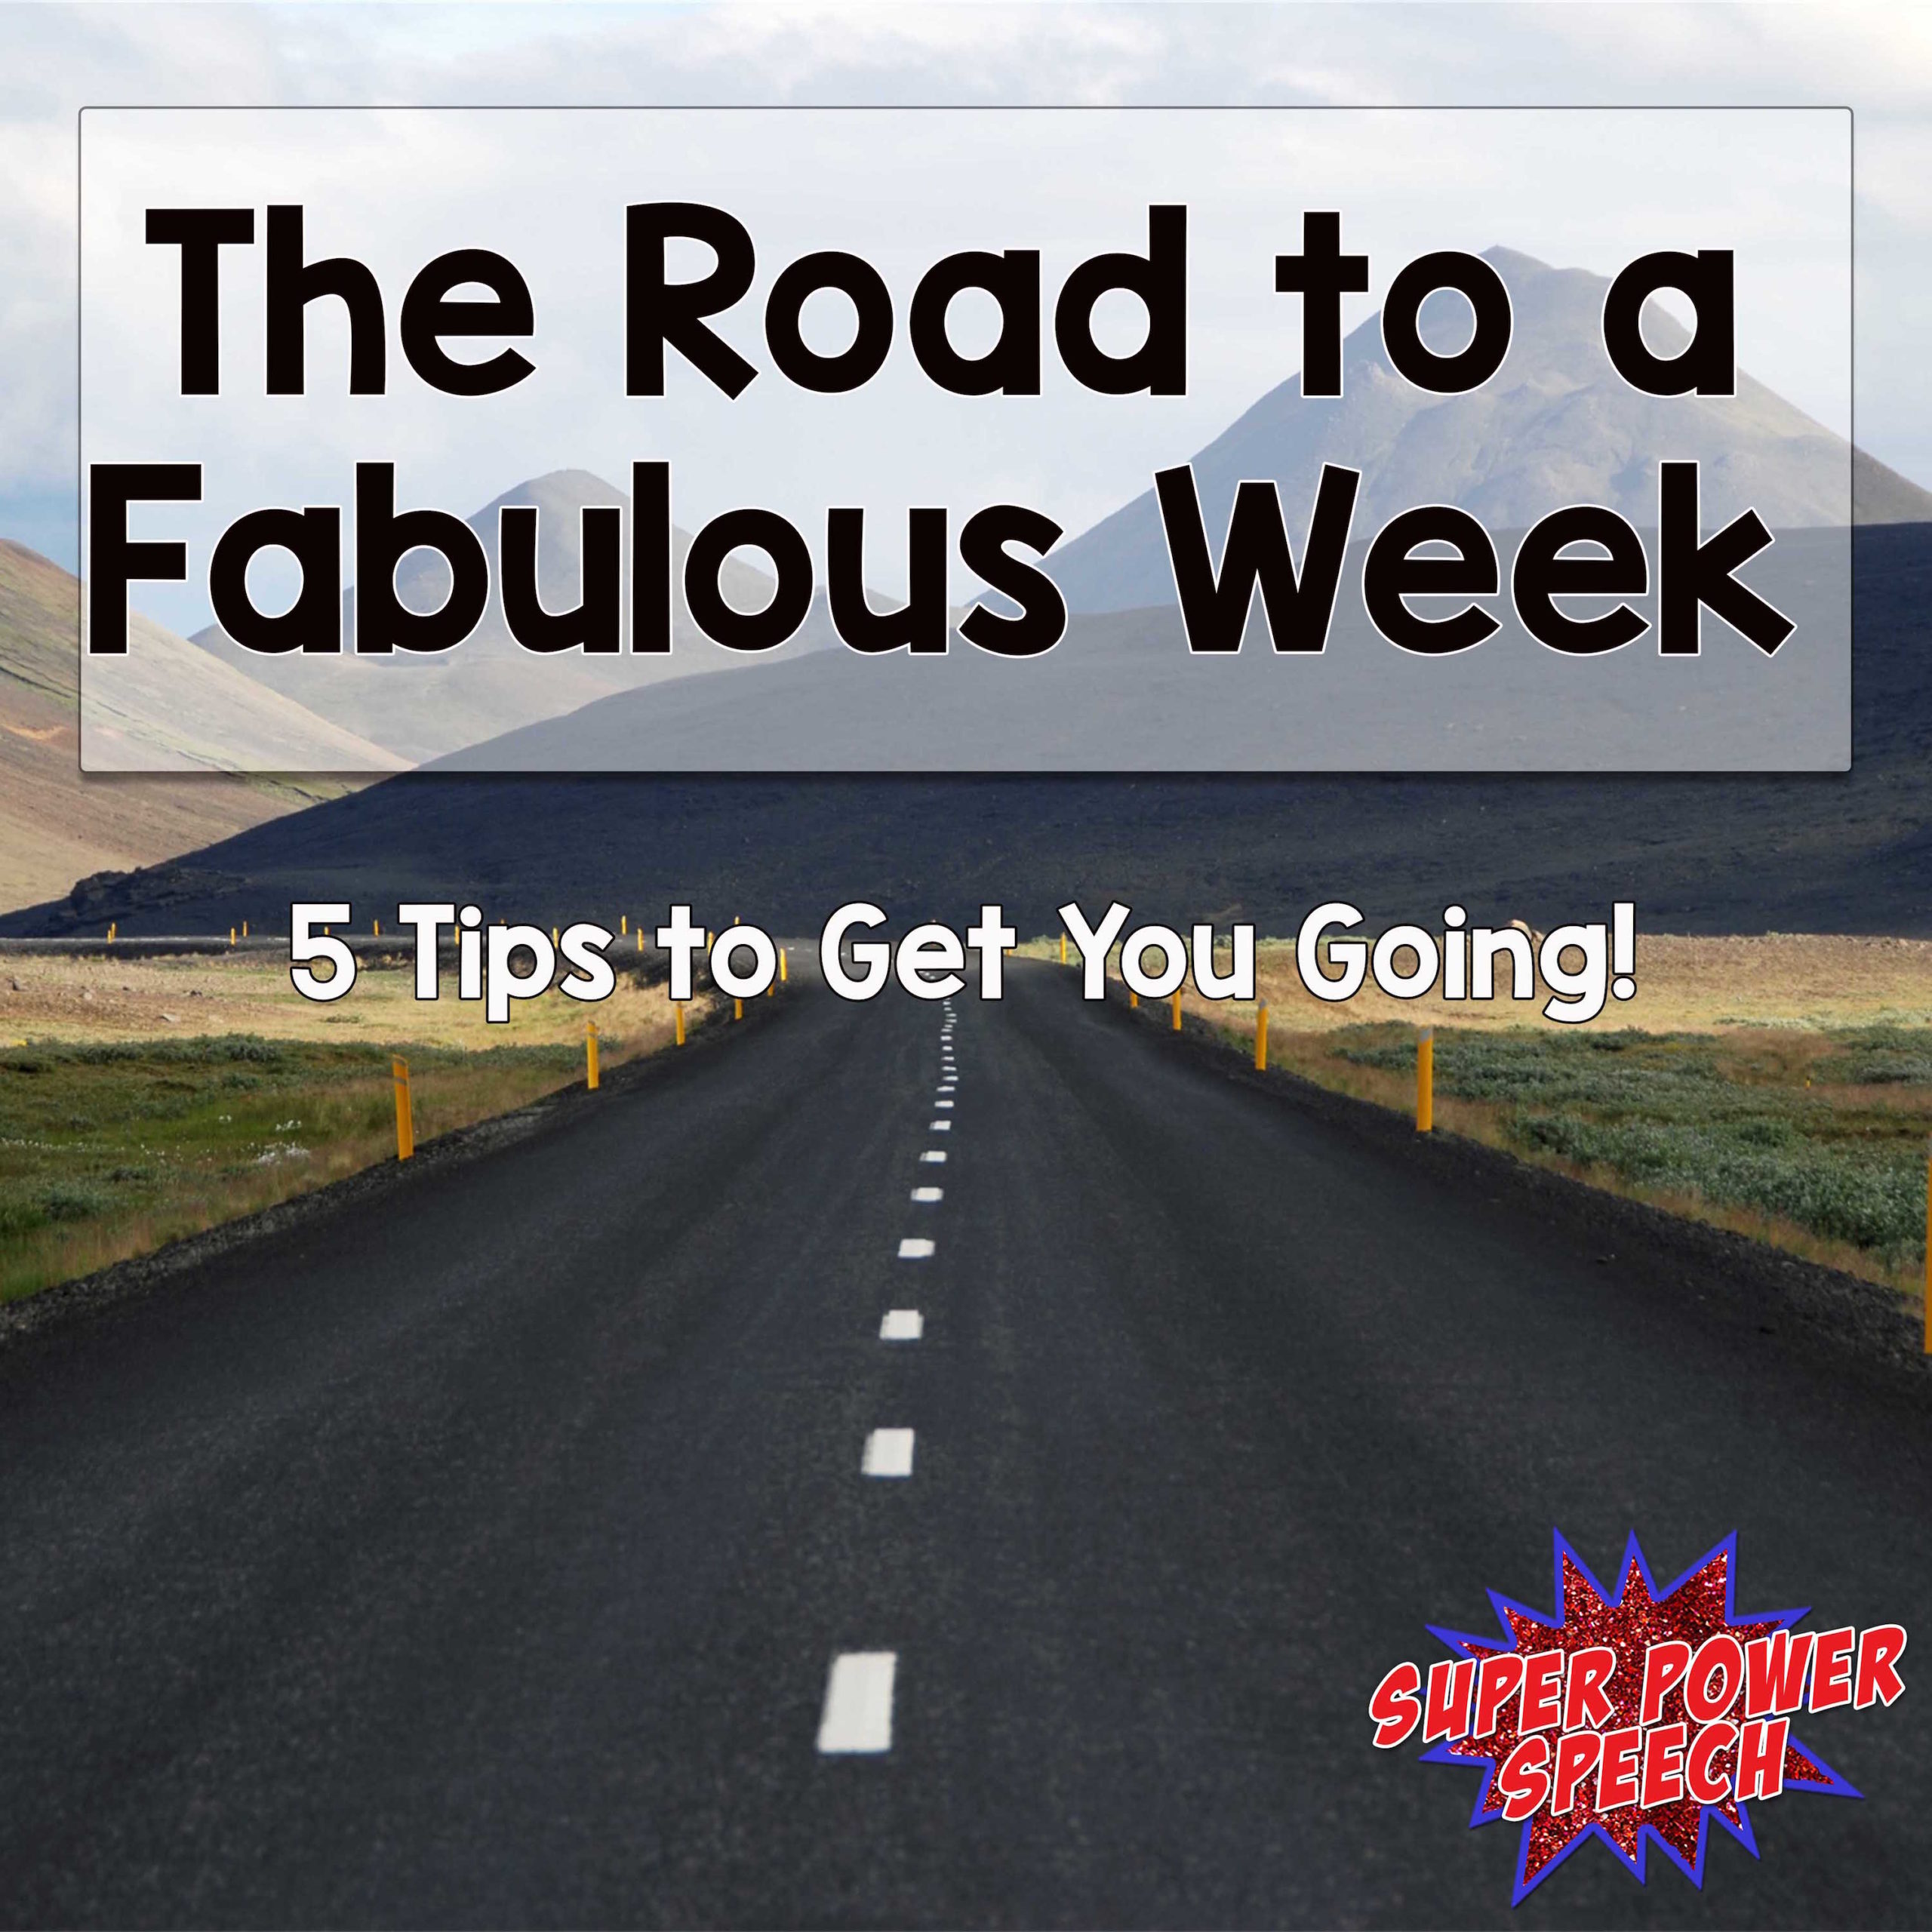 The Road to a Fabulous Week